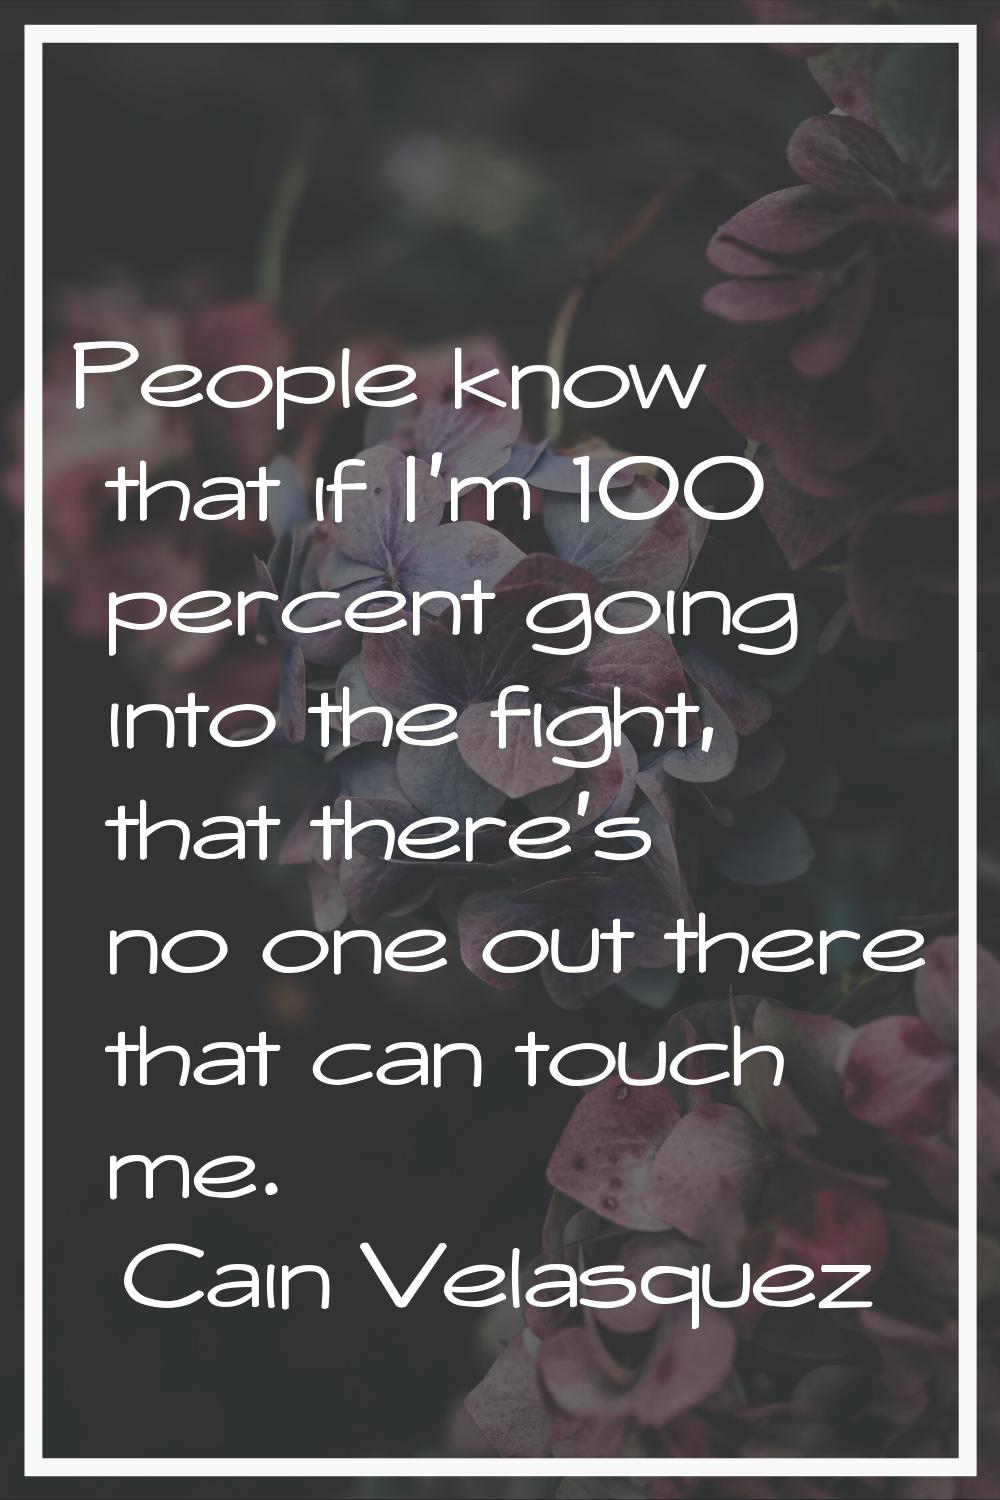 People know that if I'm 100 percent going into the fight, that there's no one out there that can to